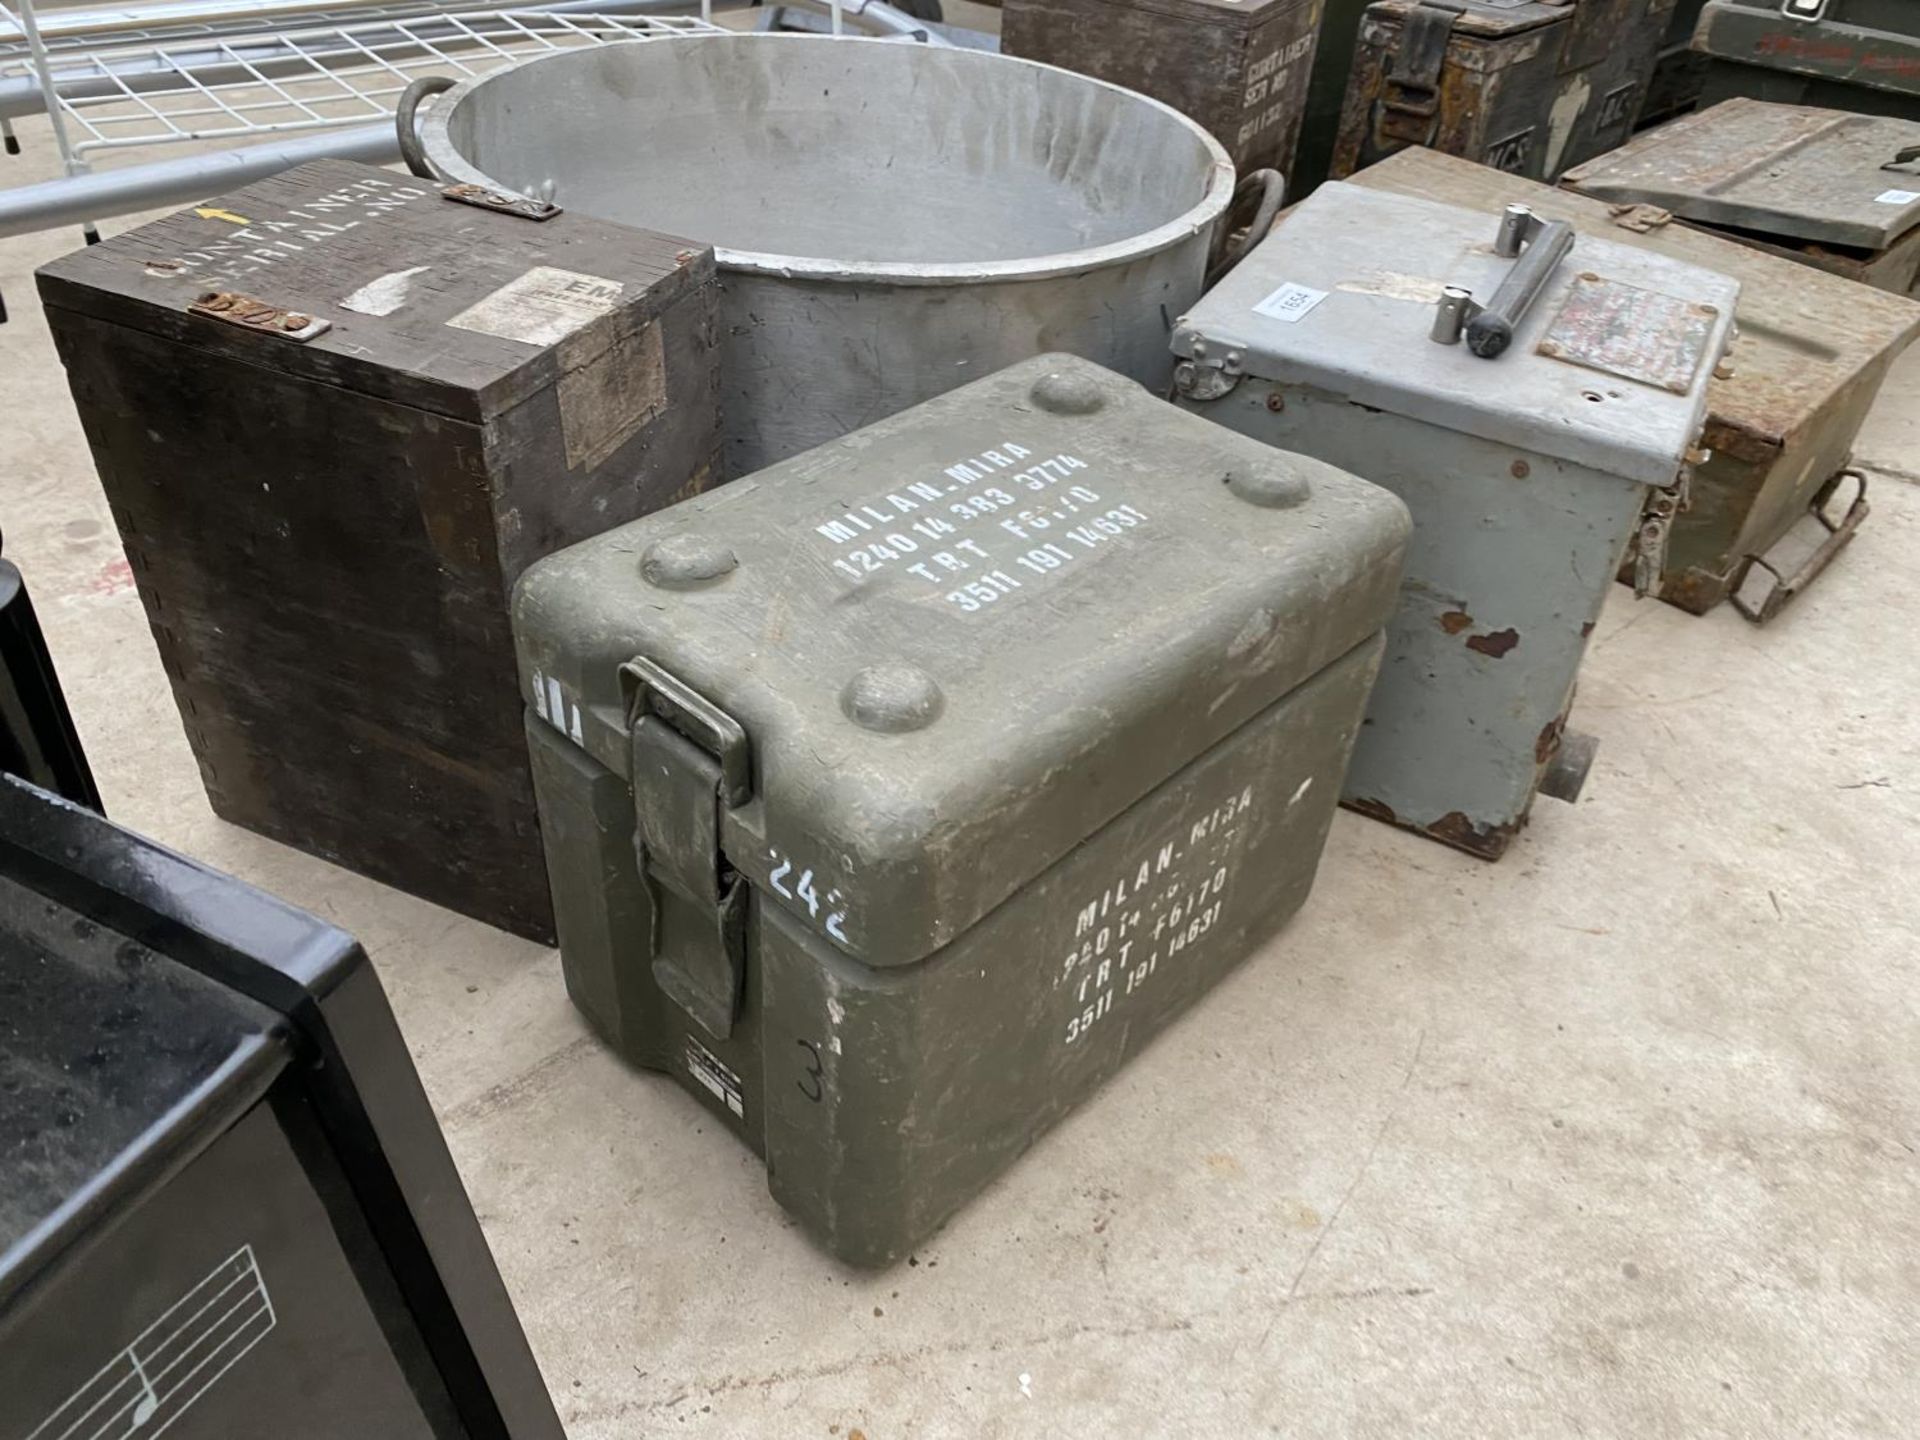 THREE MILITARY STORAGE BOXES AND A COOKING POT - Image 3 of 3